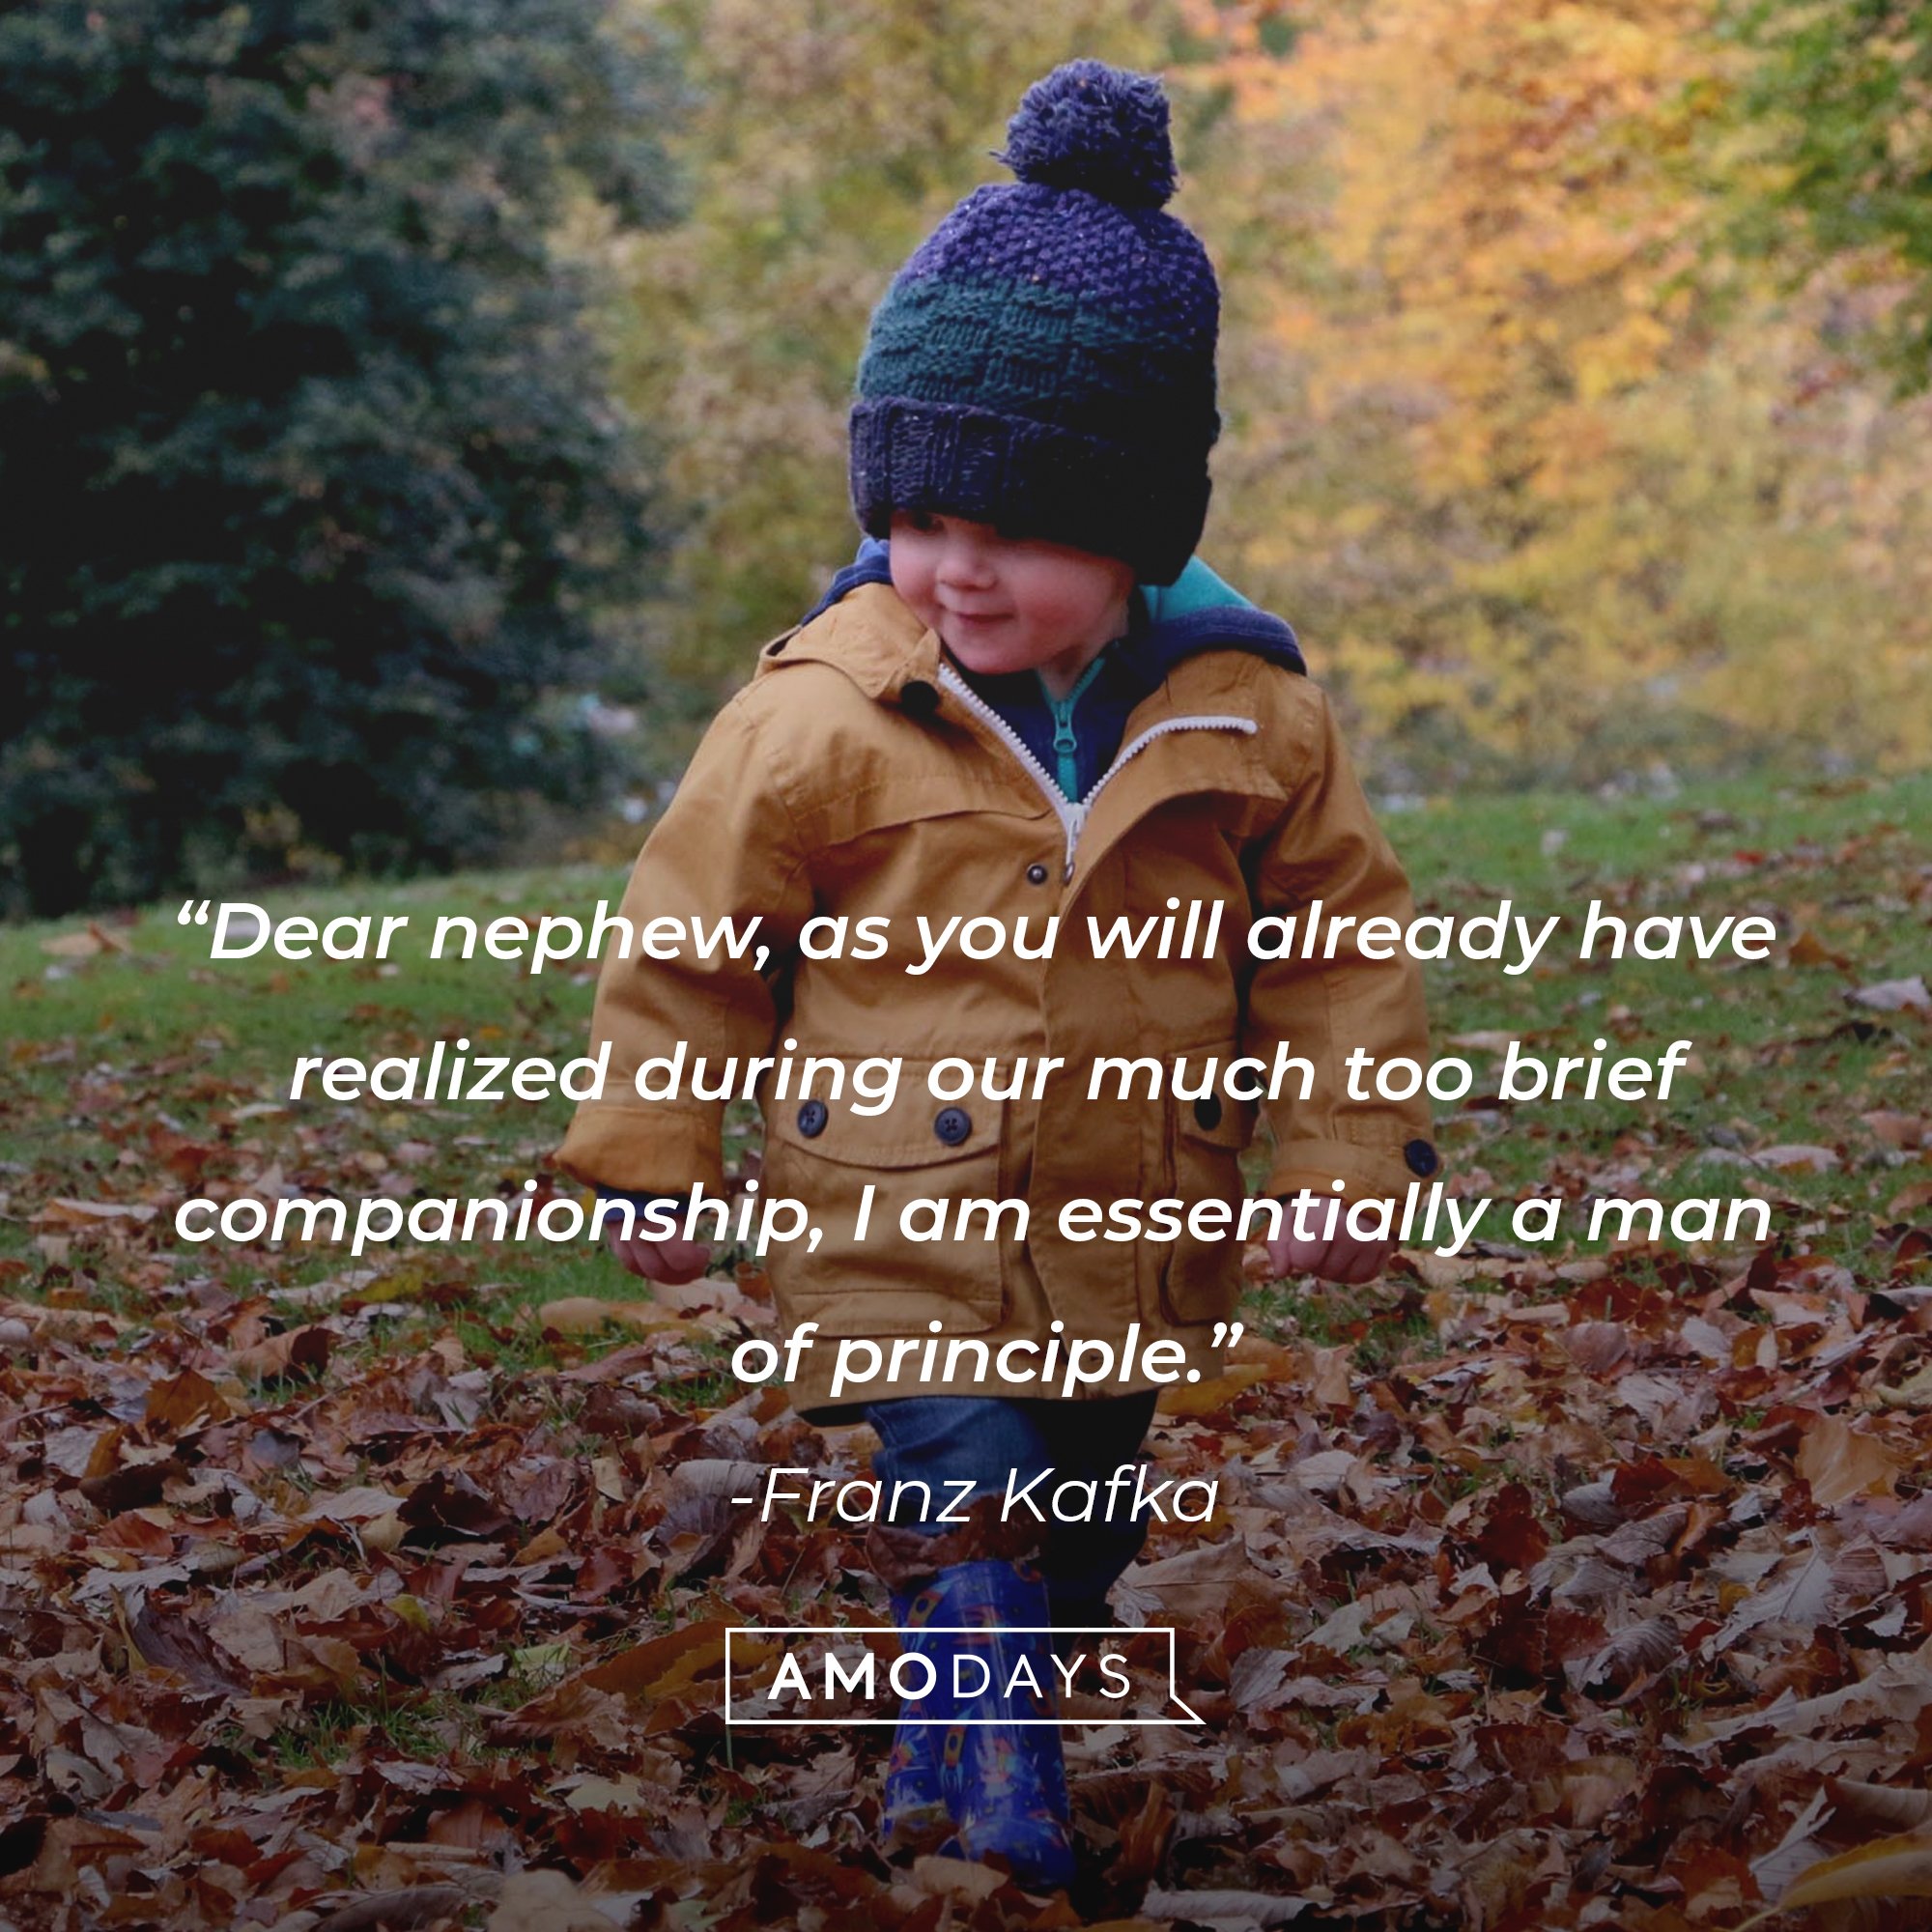 Franz Kafka's quote: “Dear nephew, as you will already have realized during our much too brief companionship, I am essentially a man of principle.” | Image: AmoDays